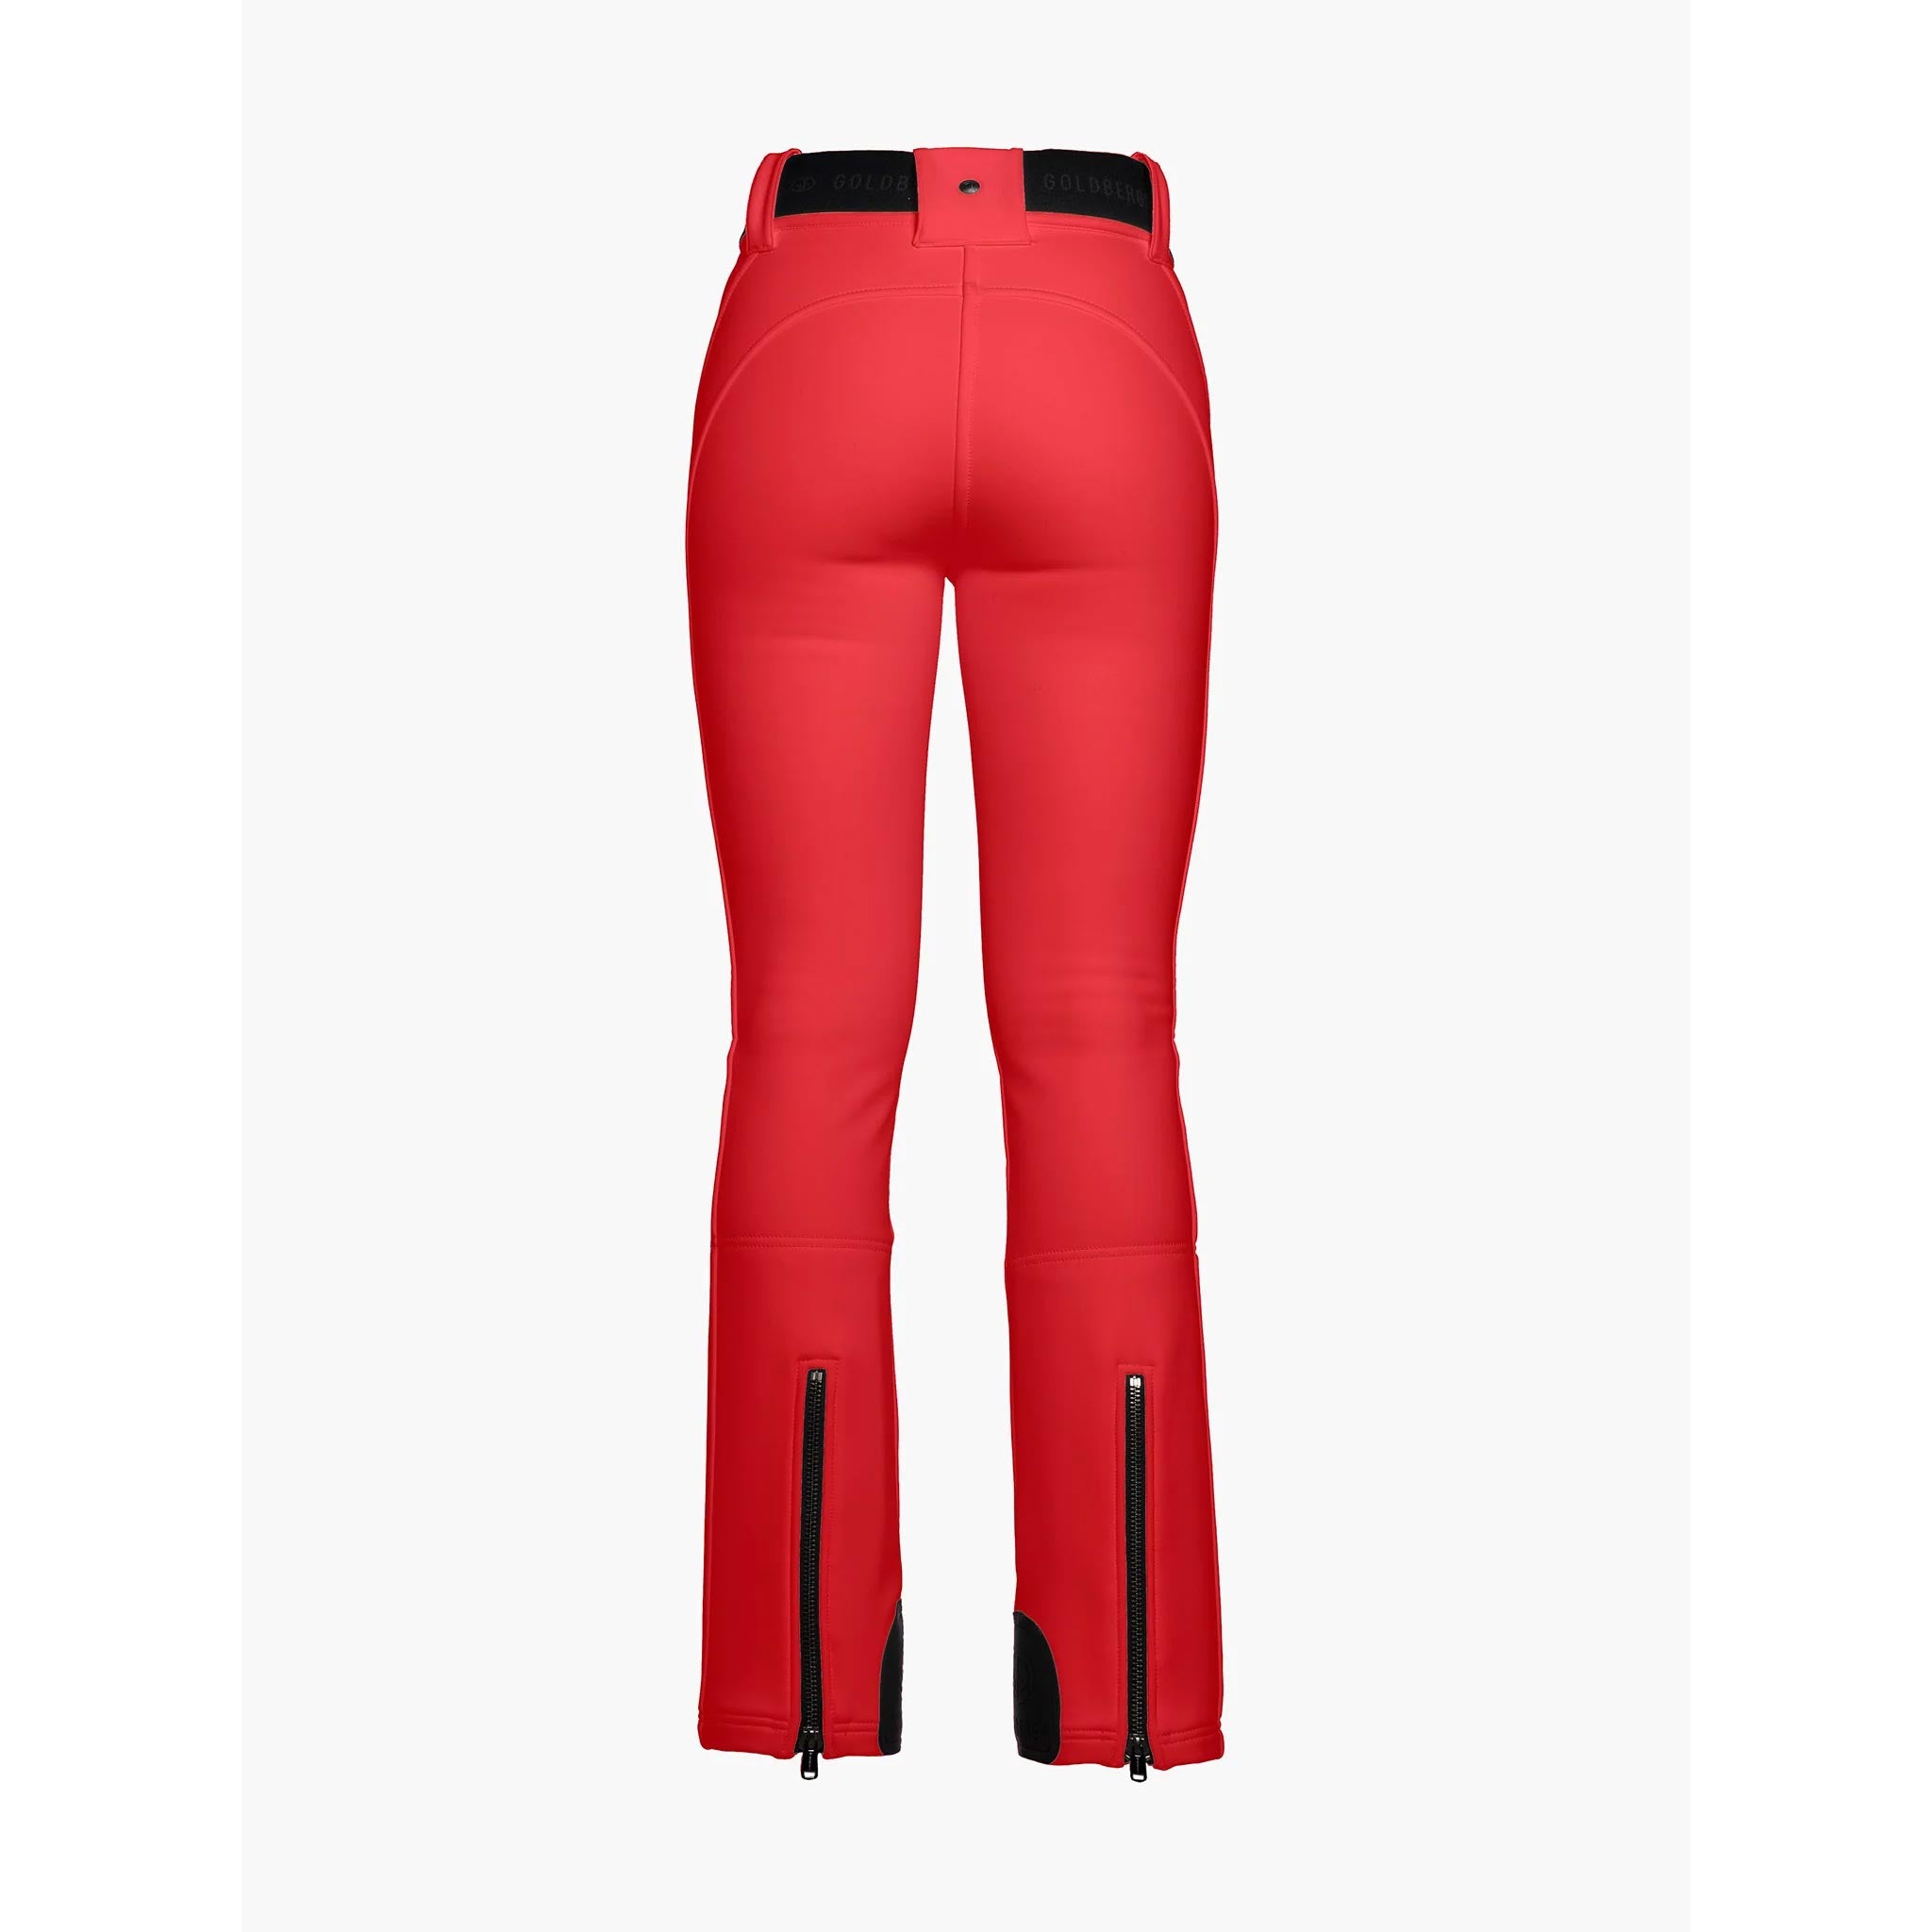 Pippa Ski Pants in Flame Red